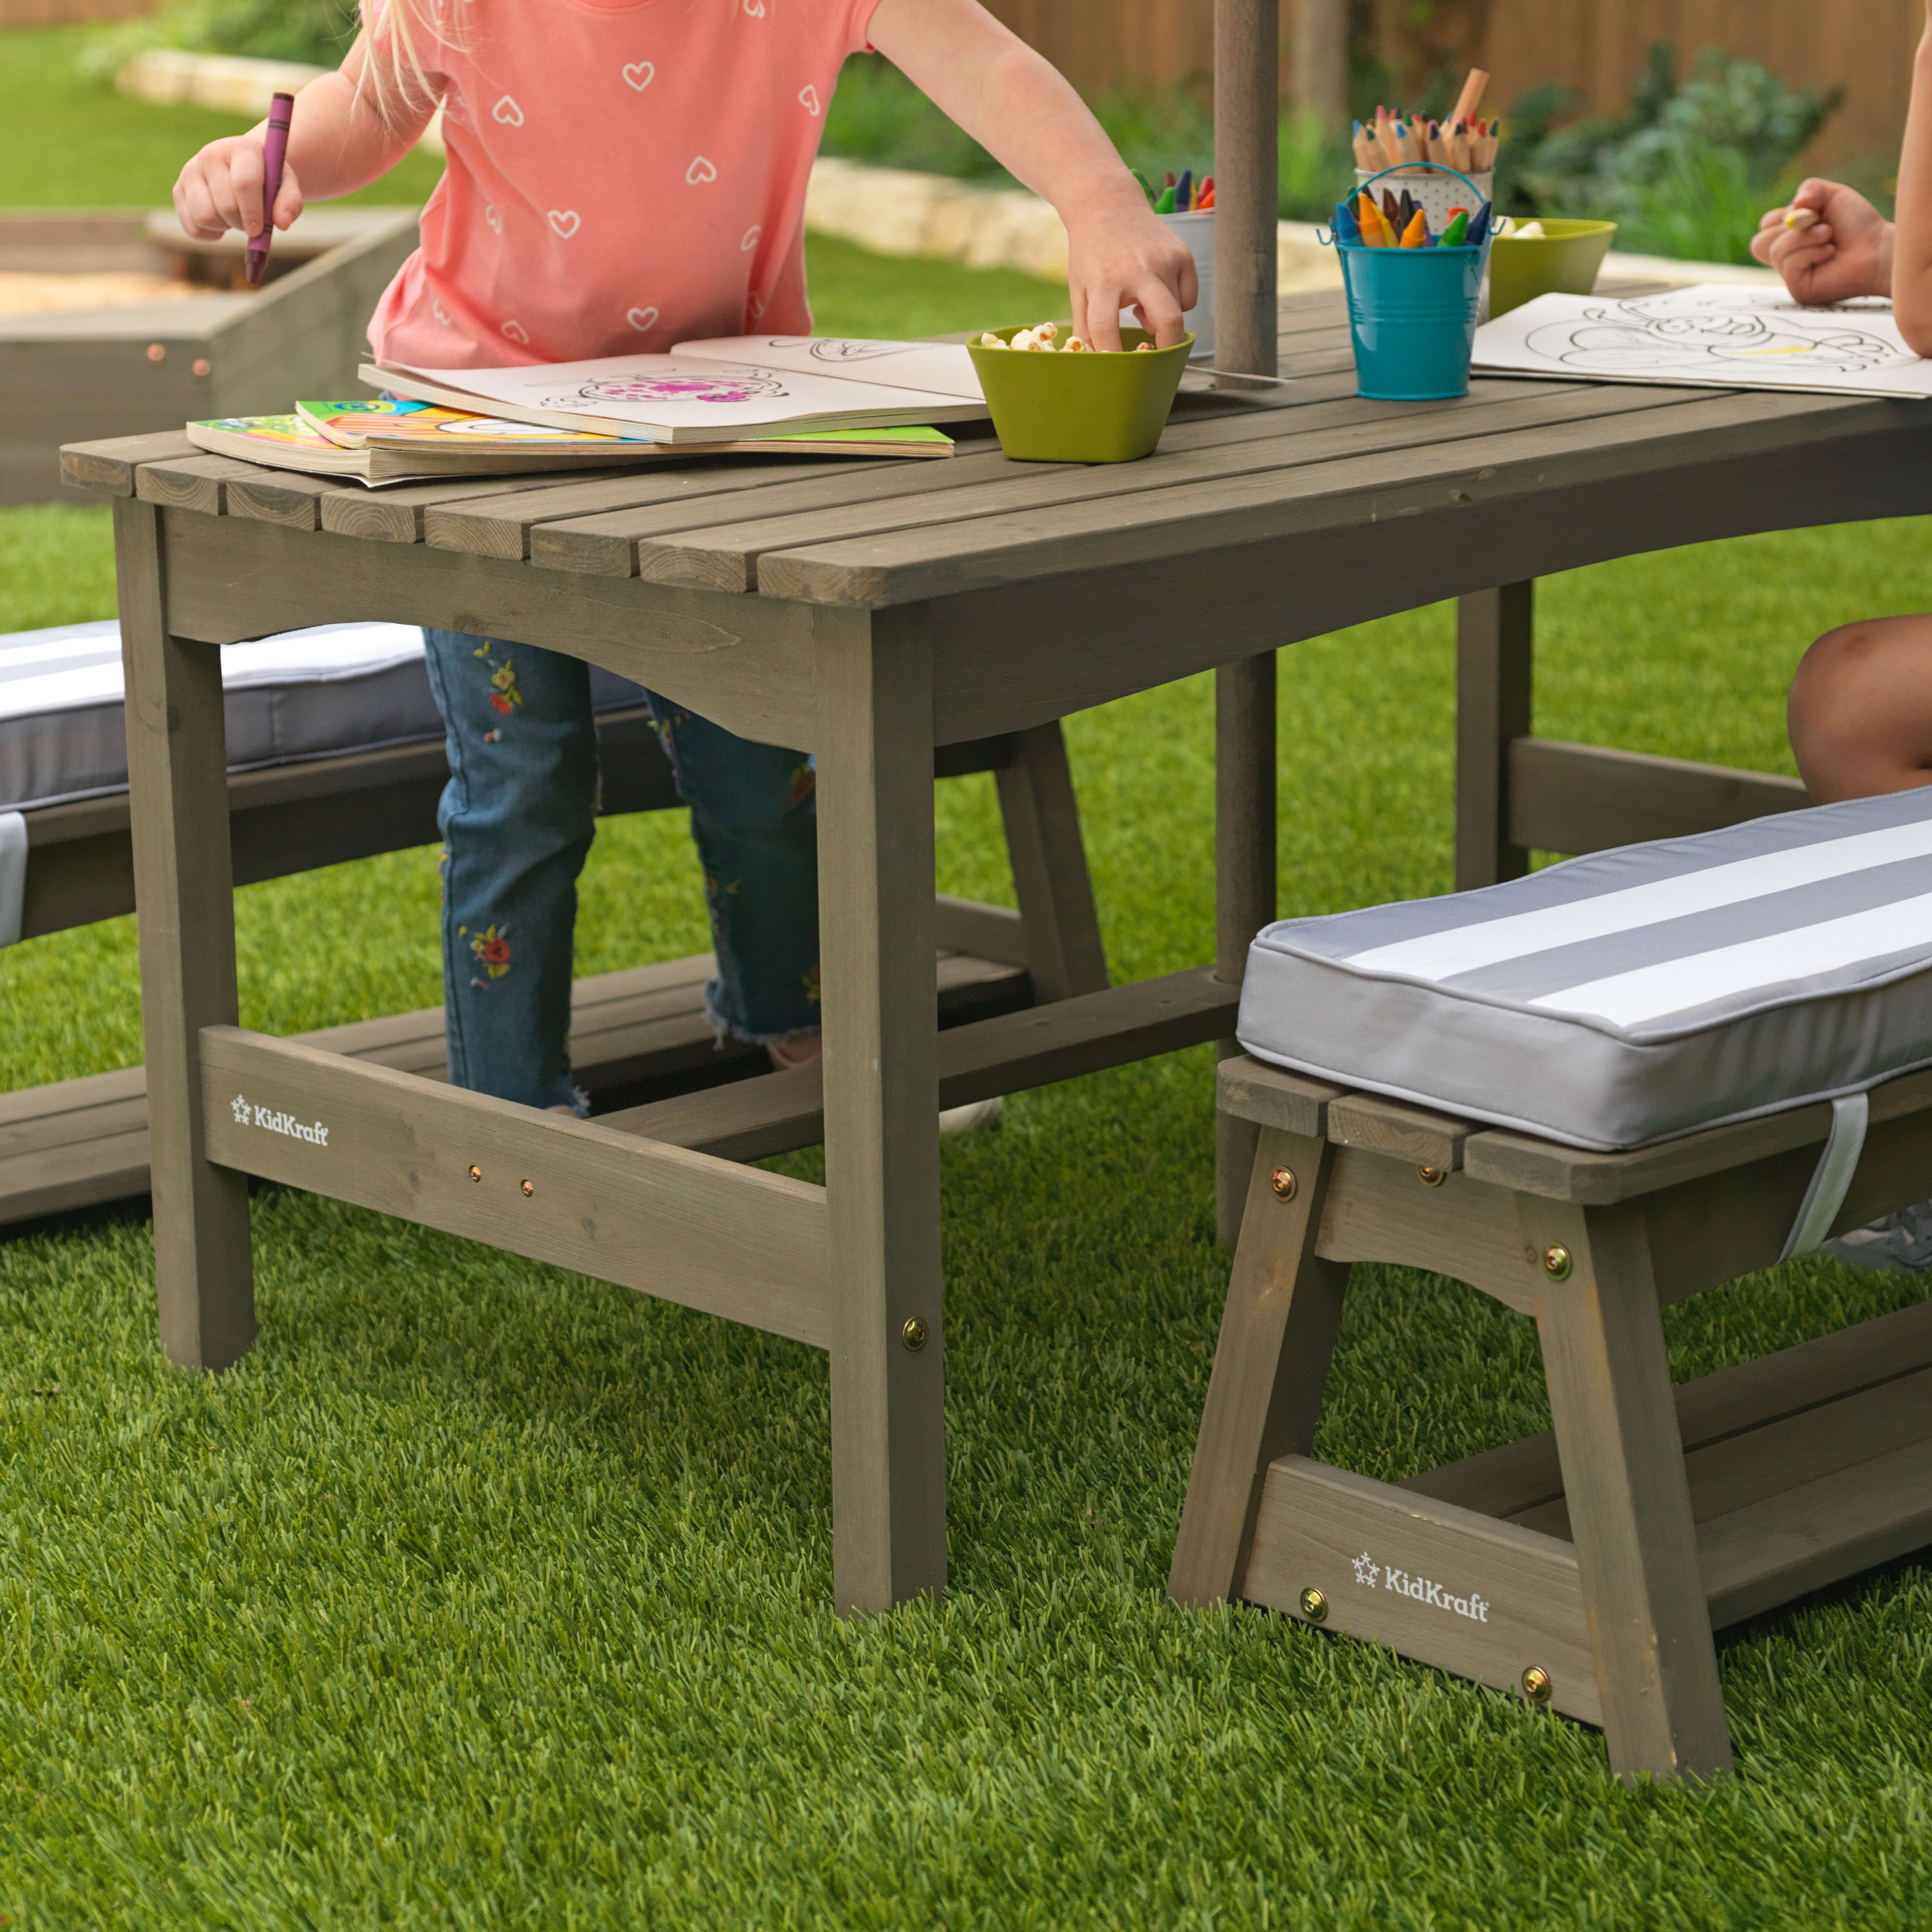 KidKraft Outdoor Table & Bench Set with Cushions and Umbrella, Gray and White Stripes, For Ages 3+ - image 5 of 9